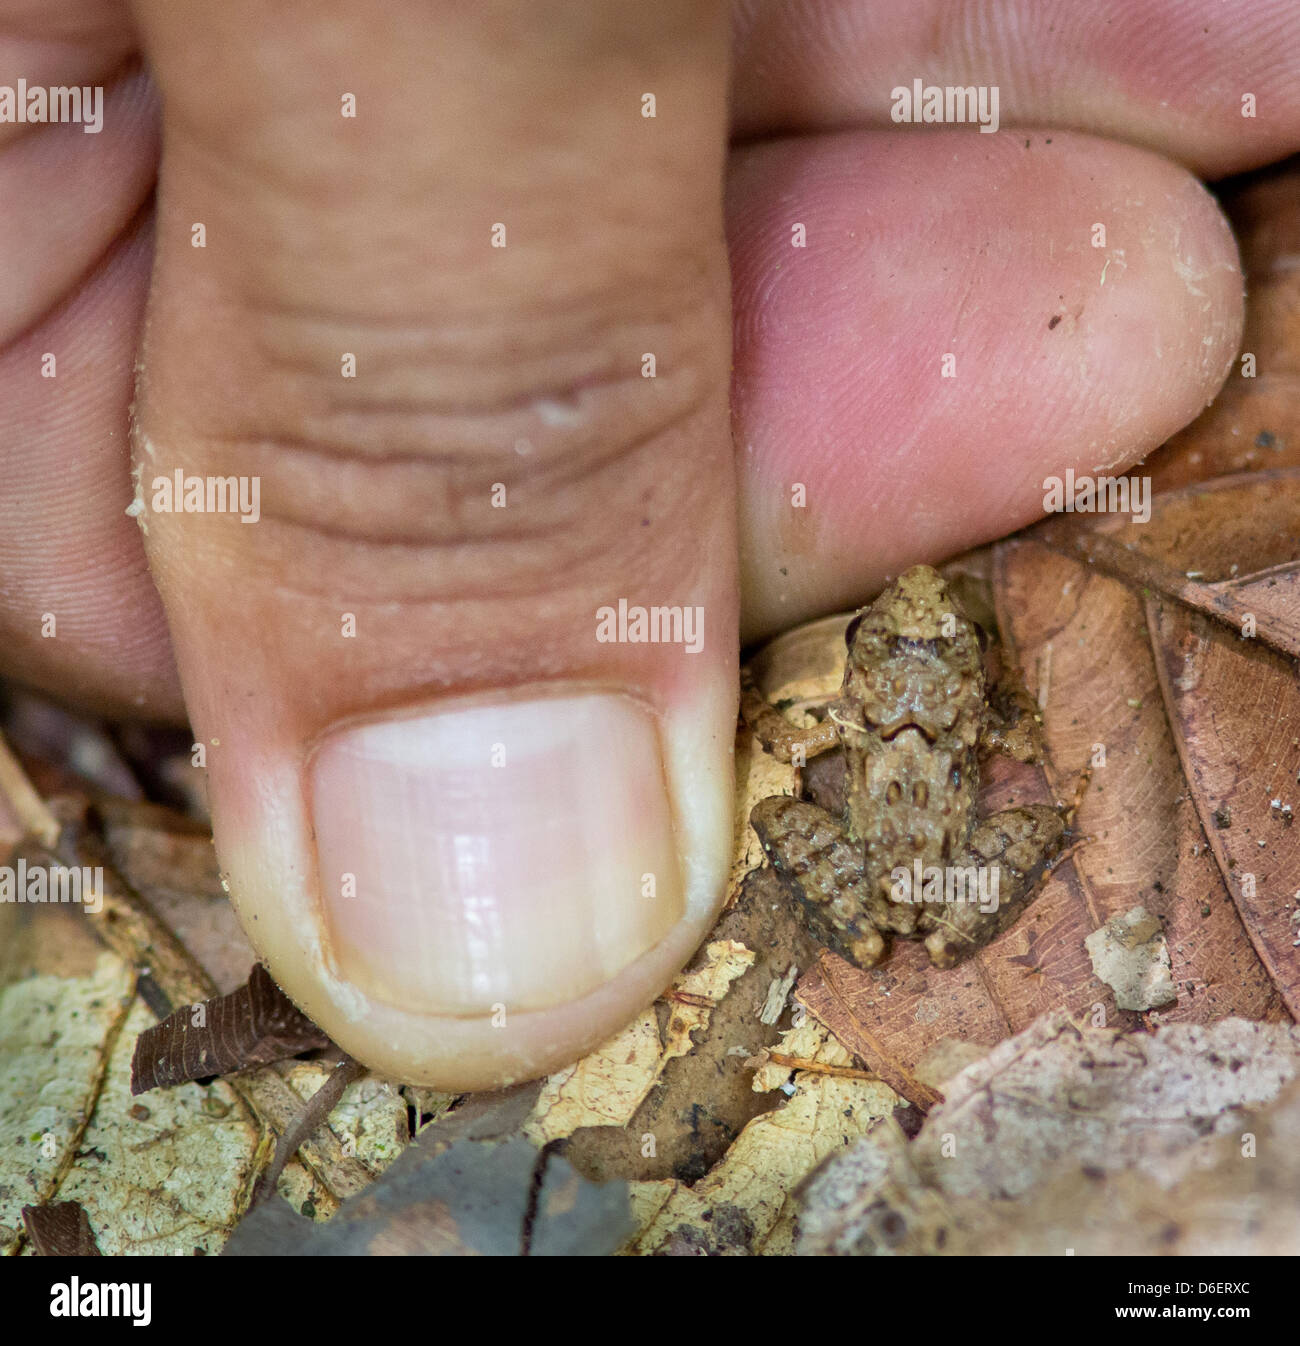 A tiny adult frog amongst the leaf litter of a rain forest with thumbnail for comparison Danum Valley Borneo Stock Photo